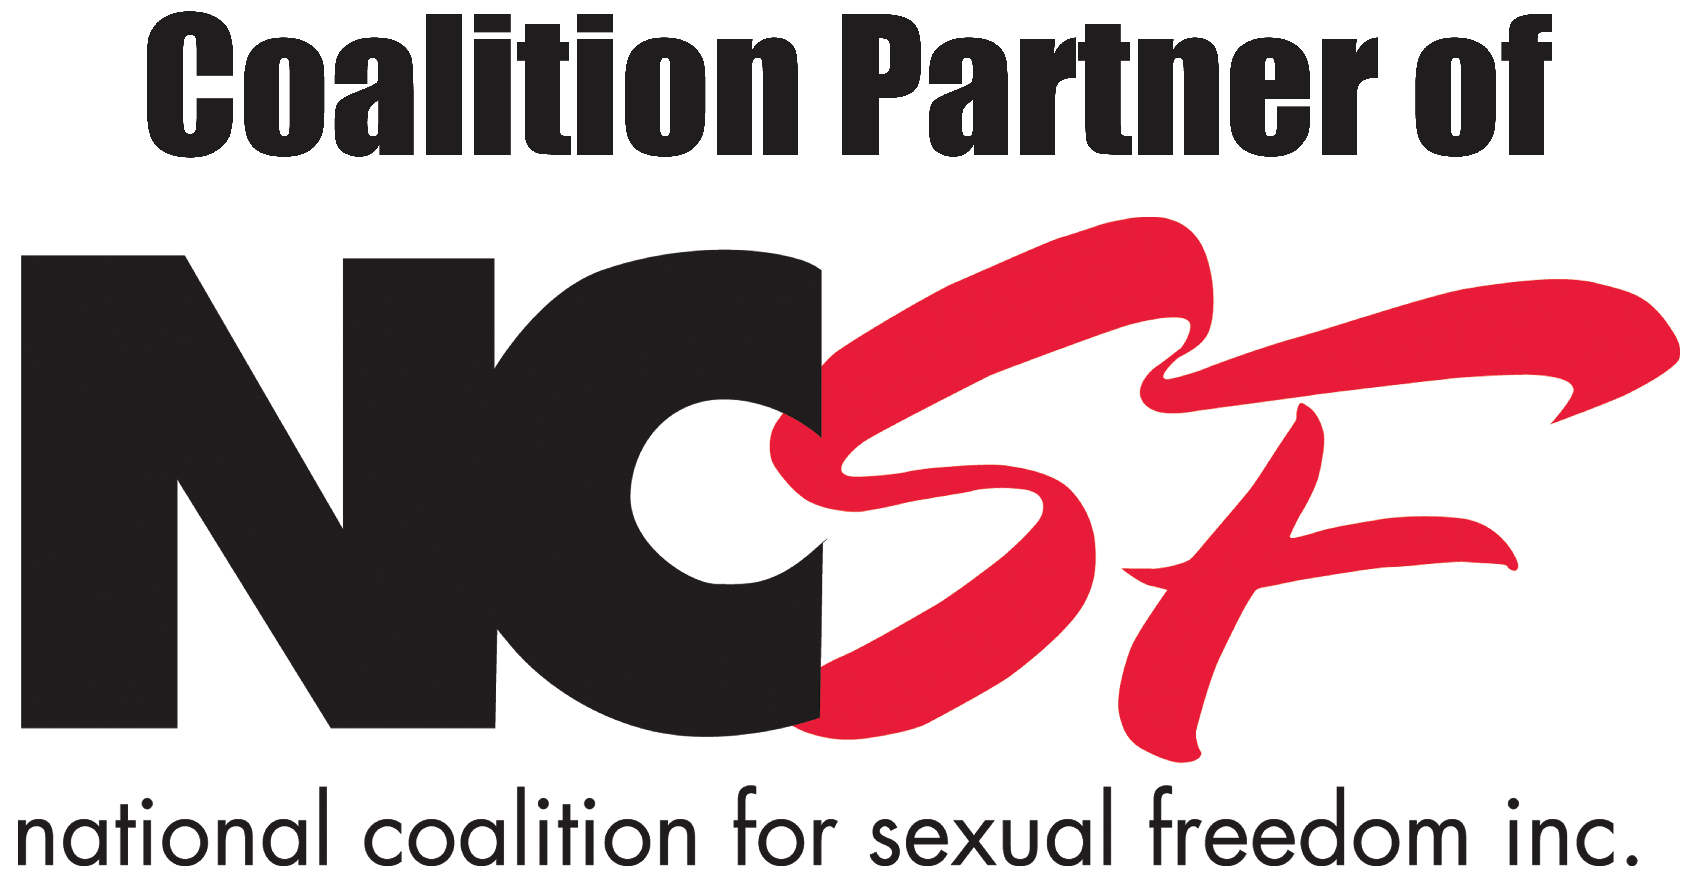 Coalition Partner of NCSF